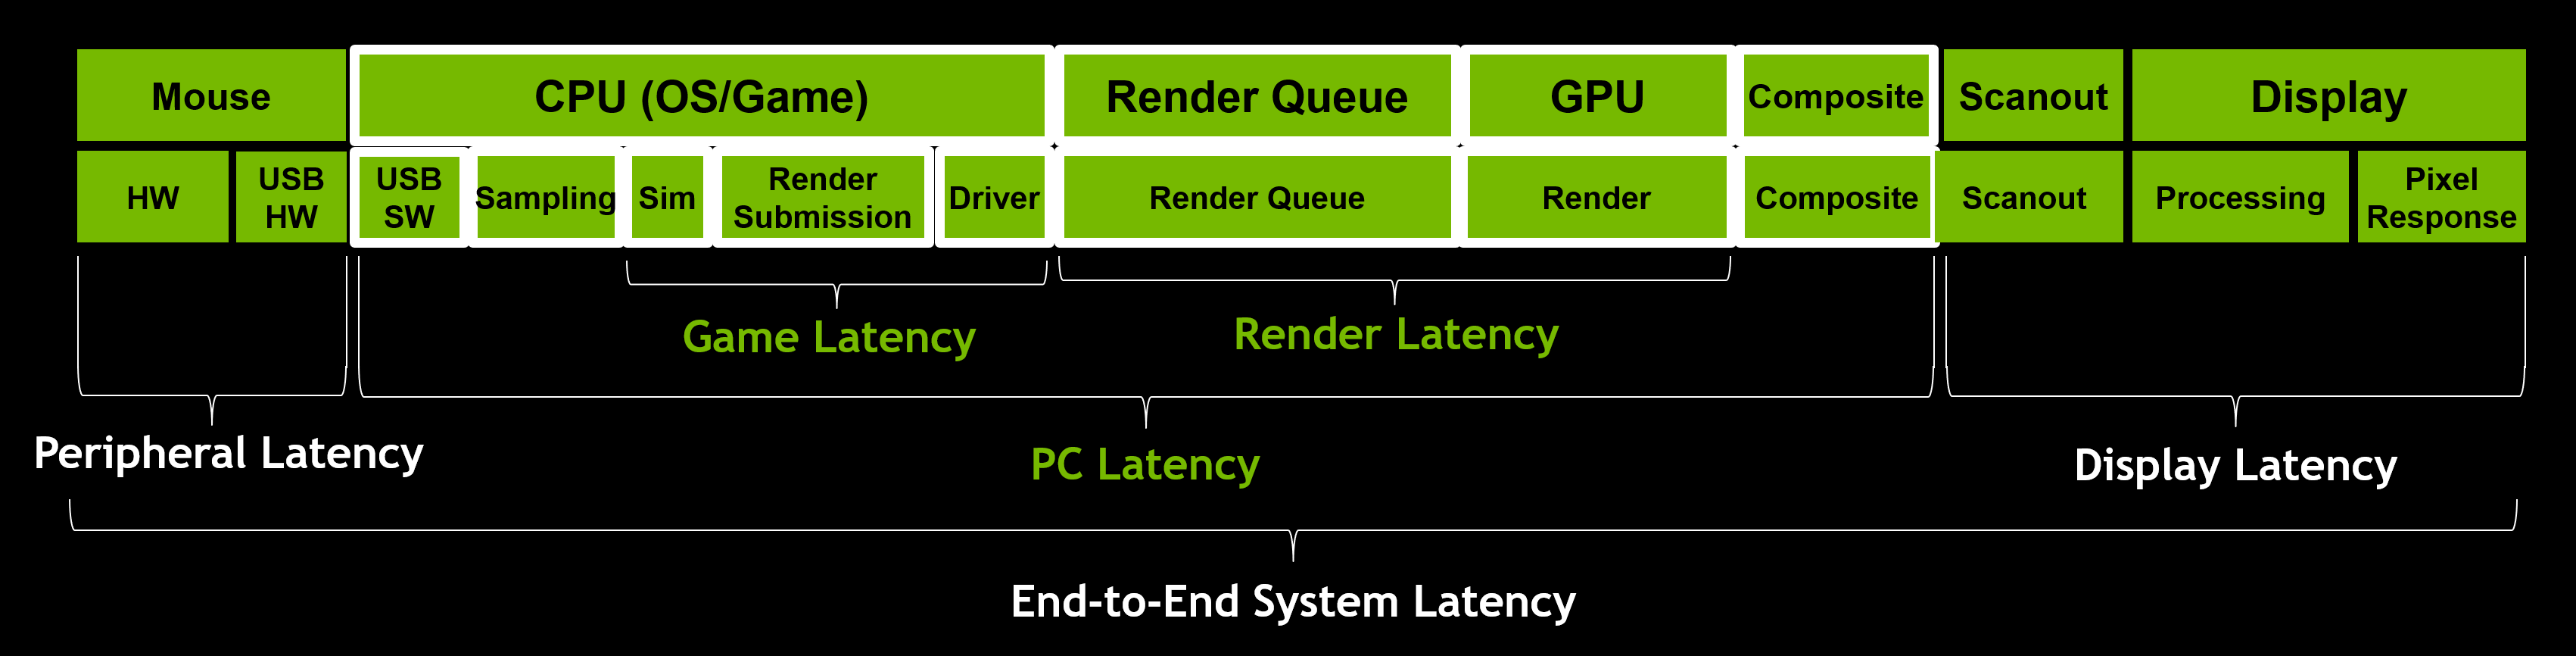 How To Reduce Lag - A Guide To Better System Latency, GeForce News